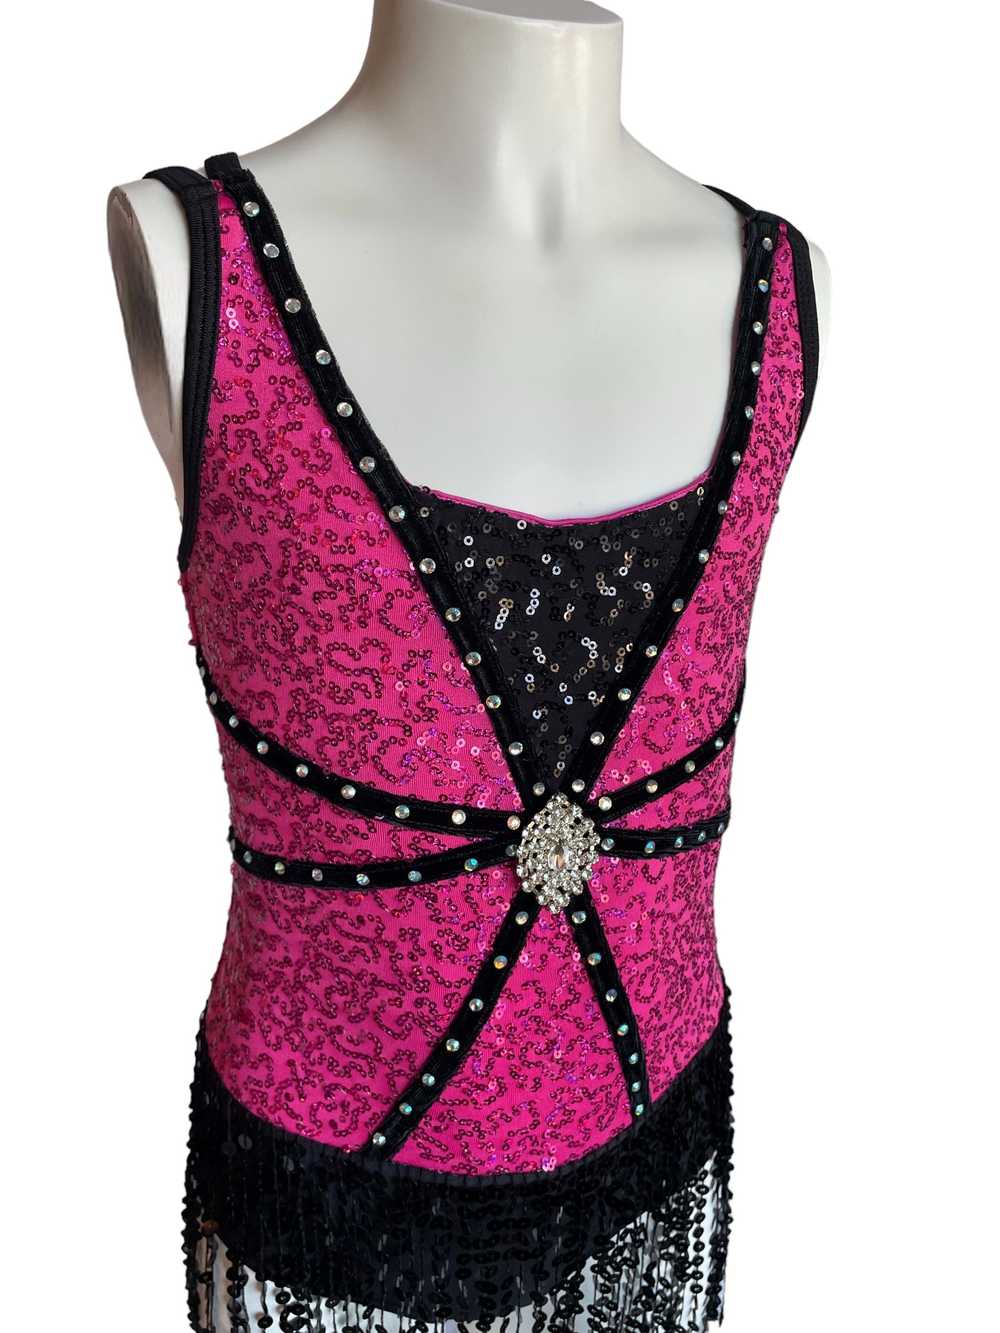 Dance costume - SPICE UP YOUR LIFE - image 4